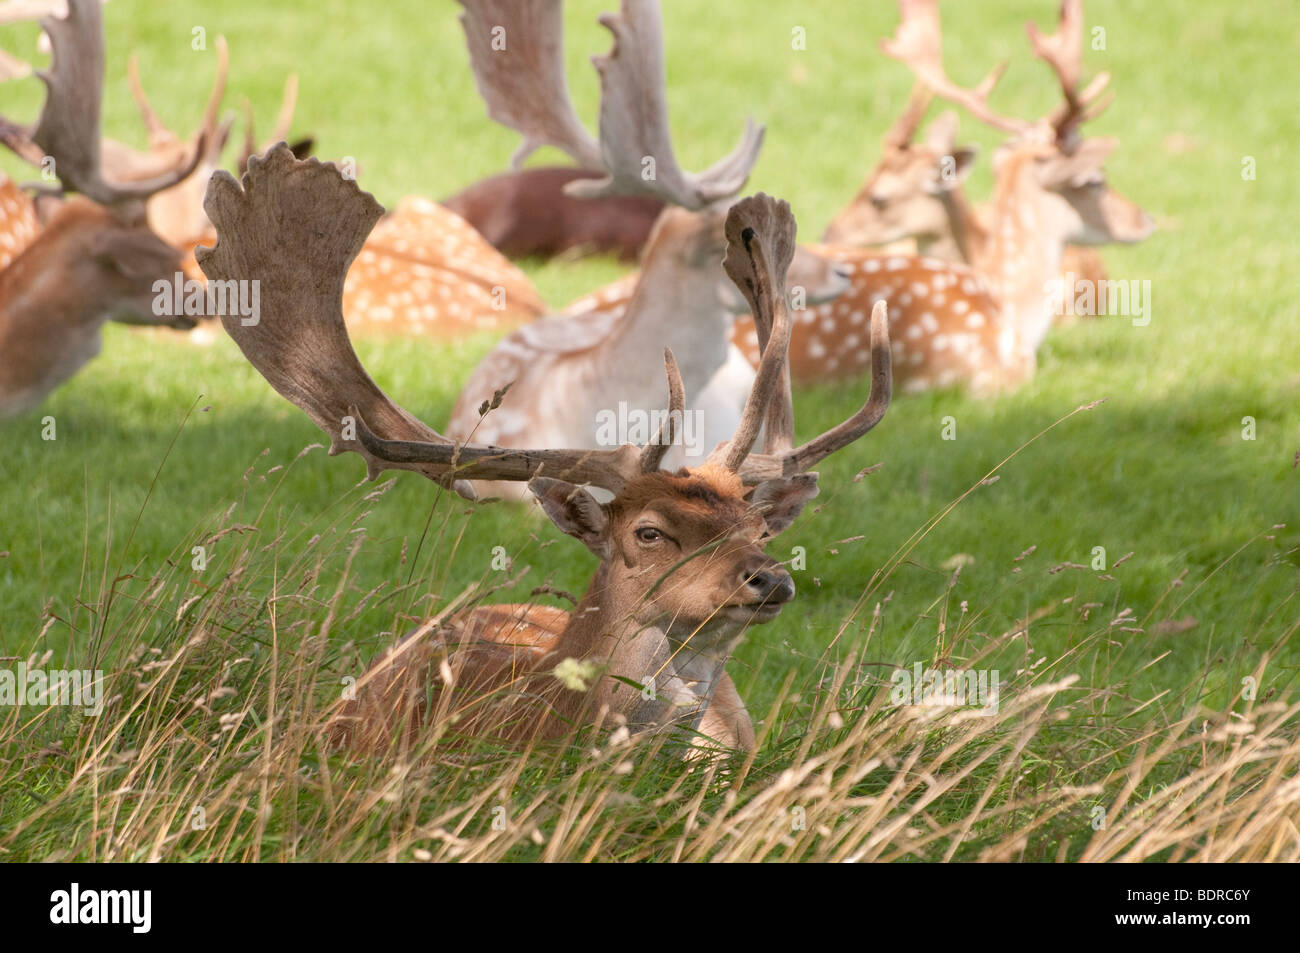 Impressive palmate antlers on a fallow deer lying in a field. Stock Photo